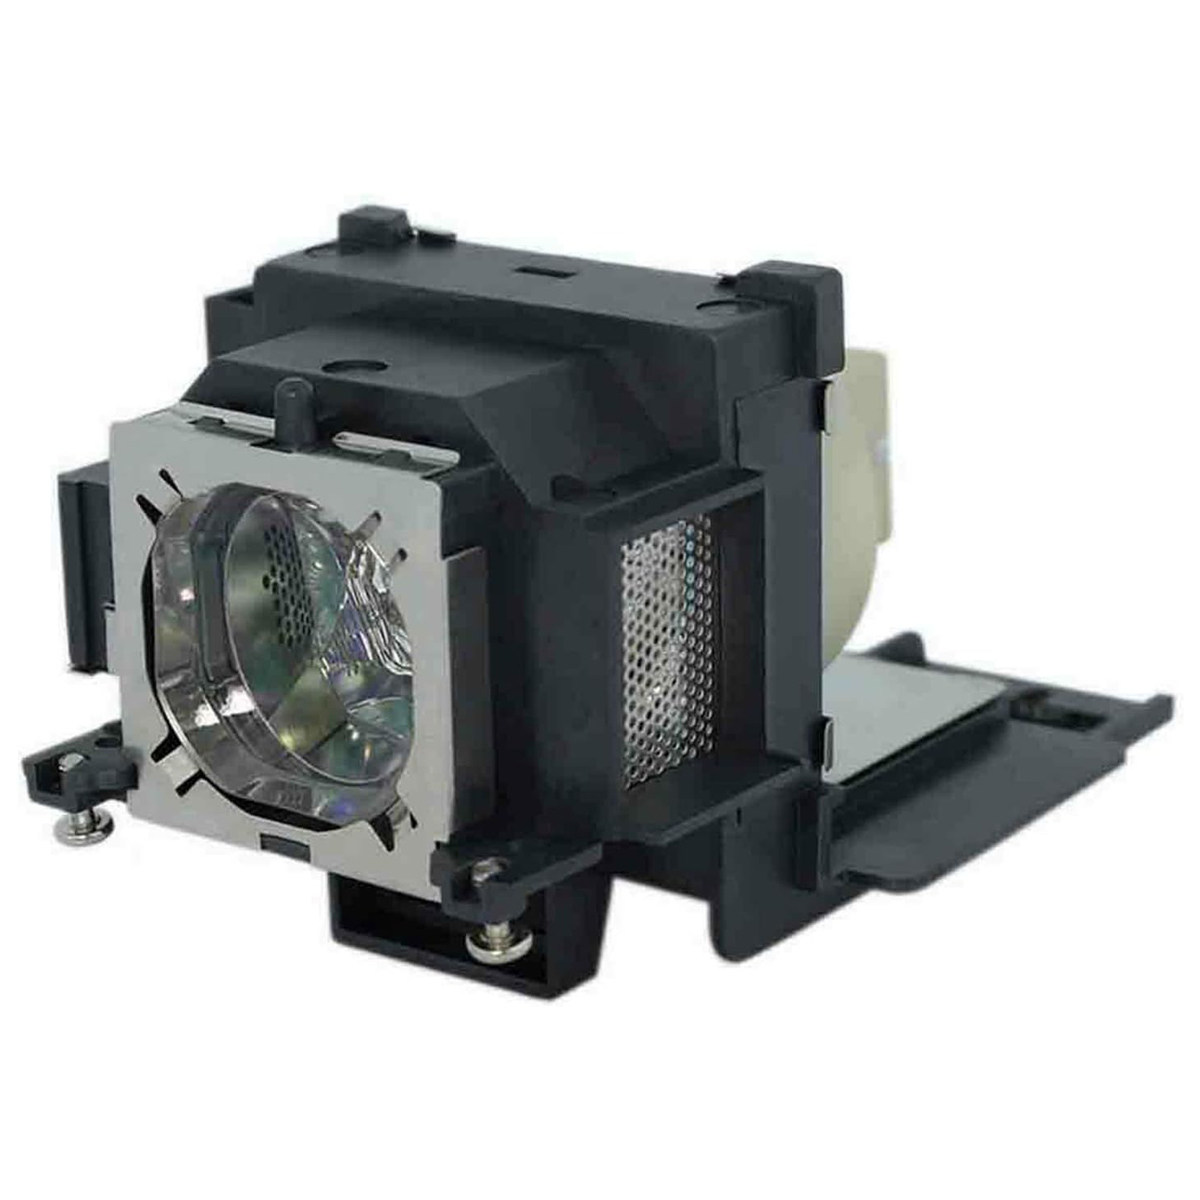 Replacement Projector lamp POA-LMP148 For SANYO PLC-XU4000